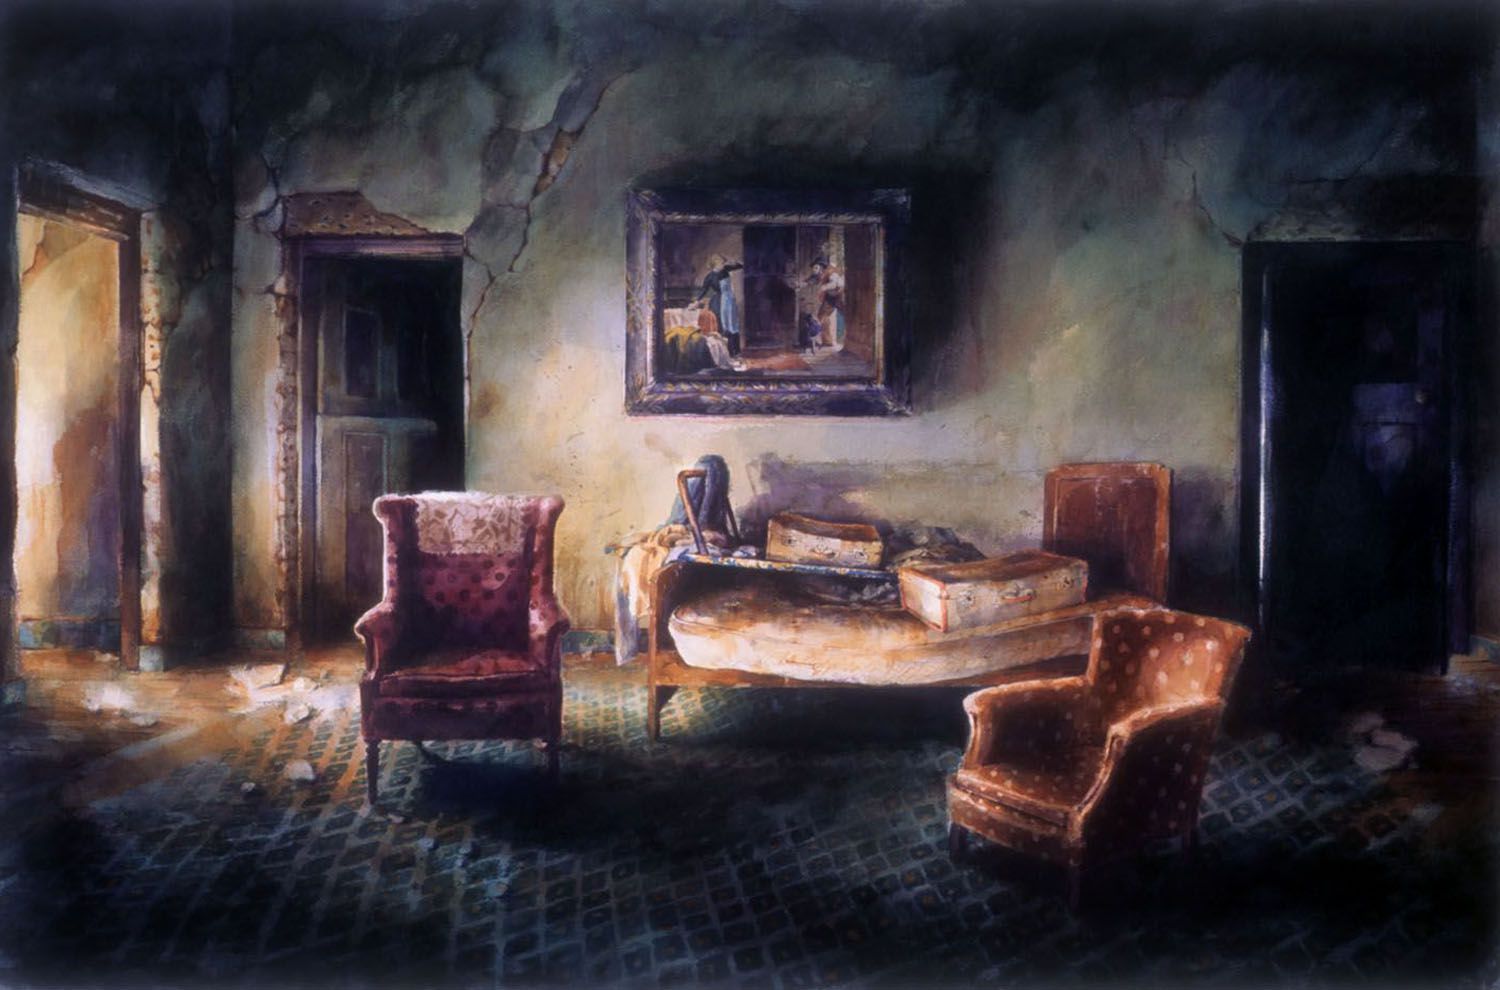 "Bed, painting, and two chairs with suitcases" 1992. Watercolour on 300gms Arches paper. 80 x 124cm